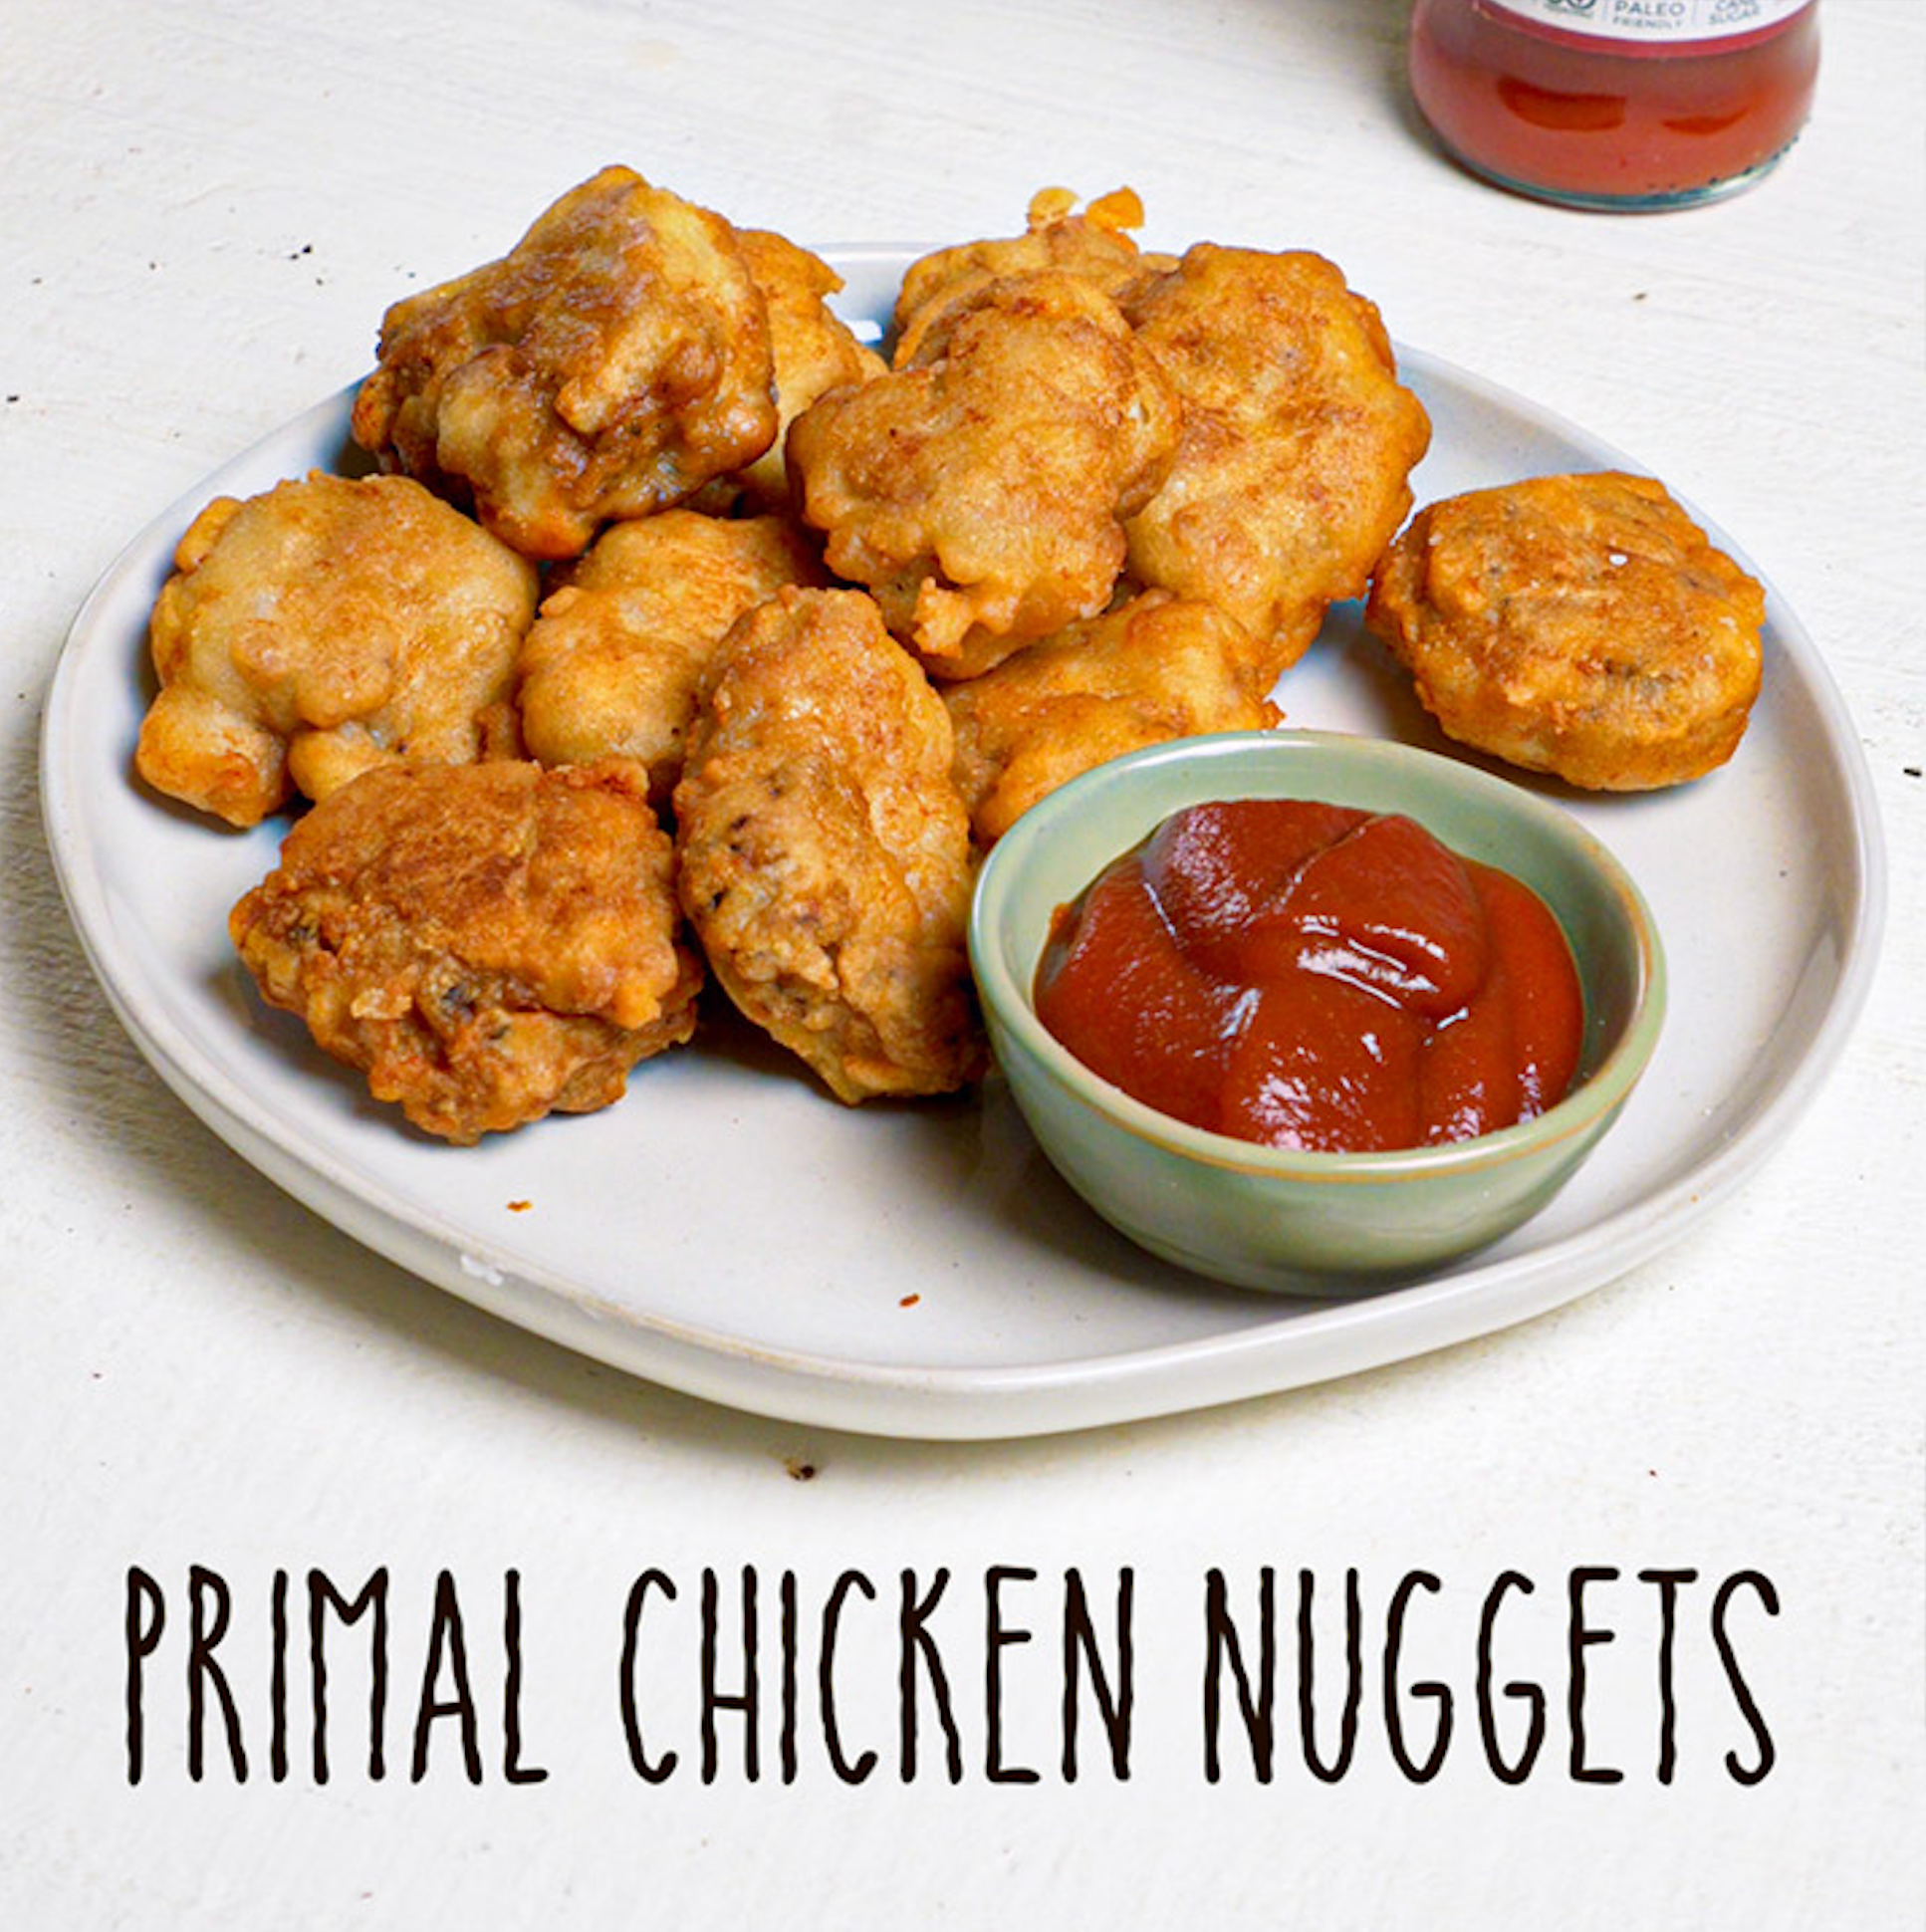 Primal Chicken Nuggets on a plate with a small dish of Primal Kitchen Organic & Unsweetened Ketchup